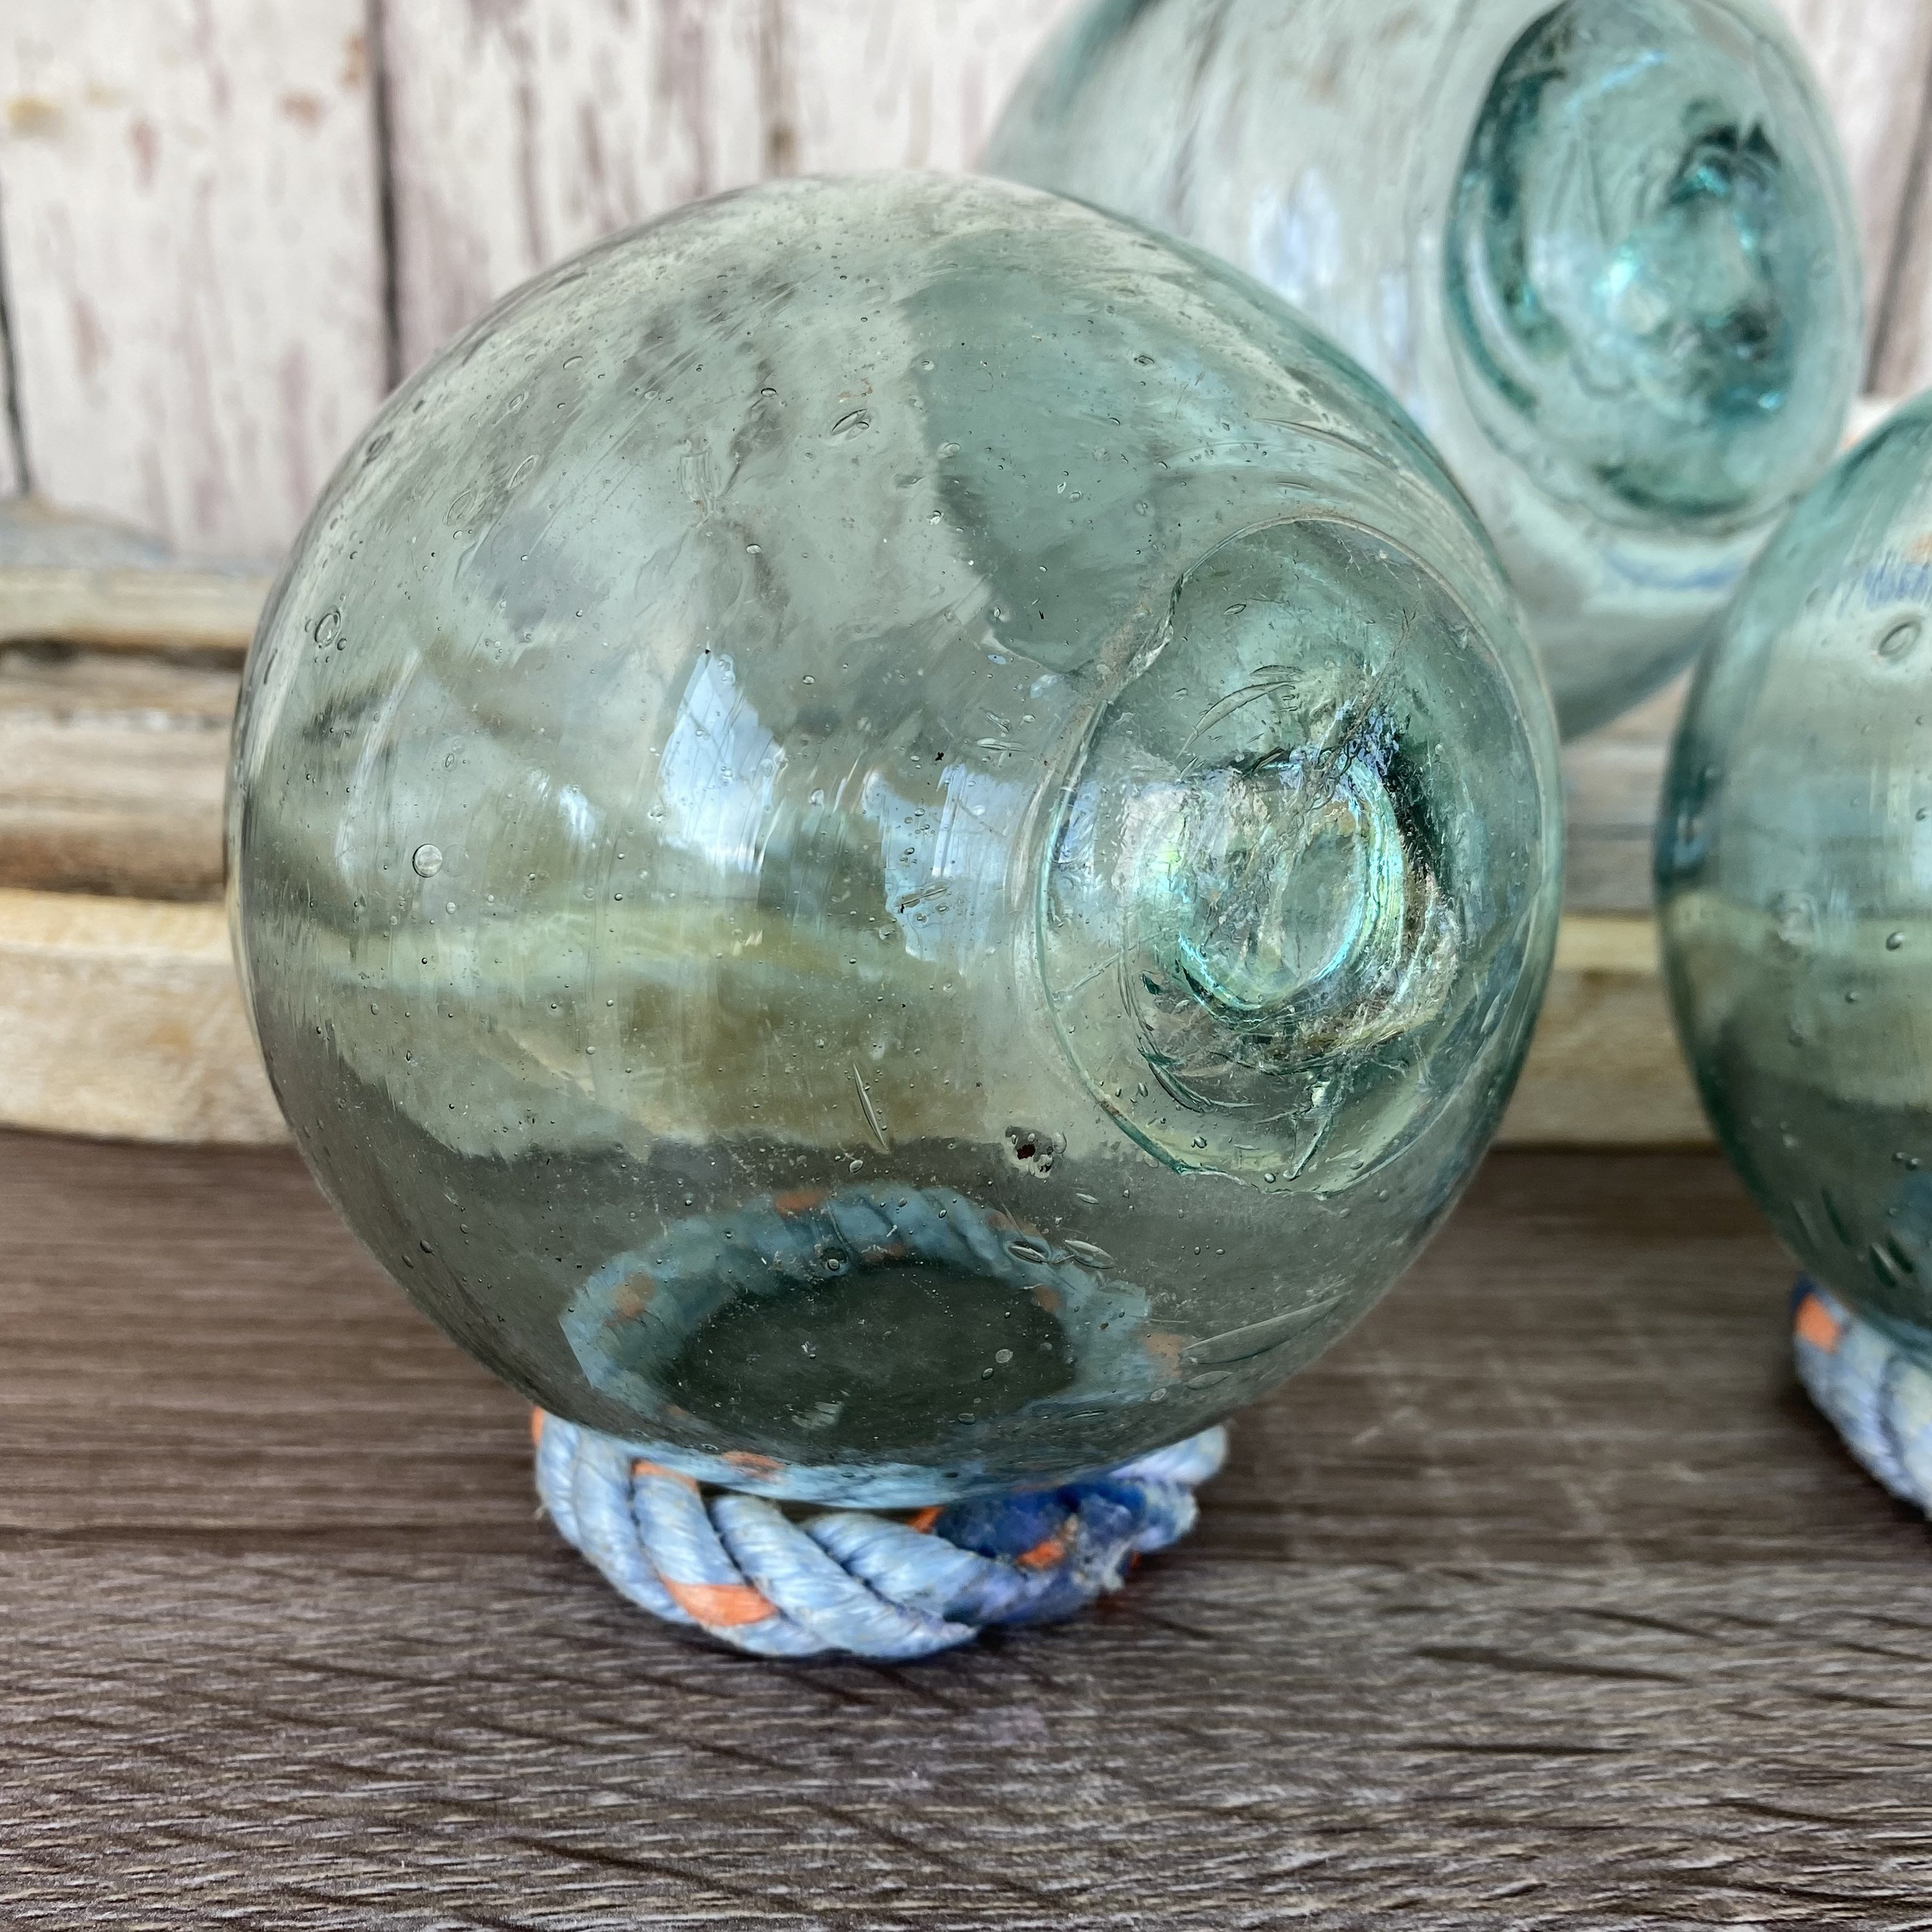 Japanese Glass Fishing Floats, 4” Softball Size, Authentic Glass Buoy From  Japan, Once Used By Fisherman On Nets - Single or Set of 3